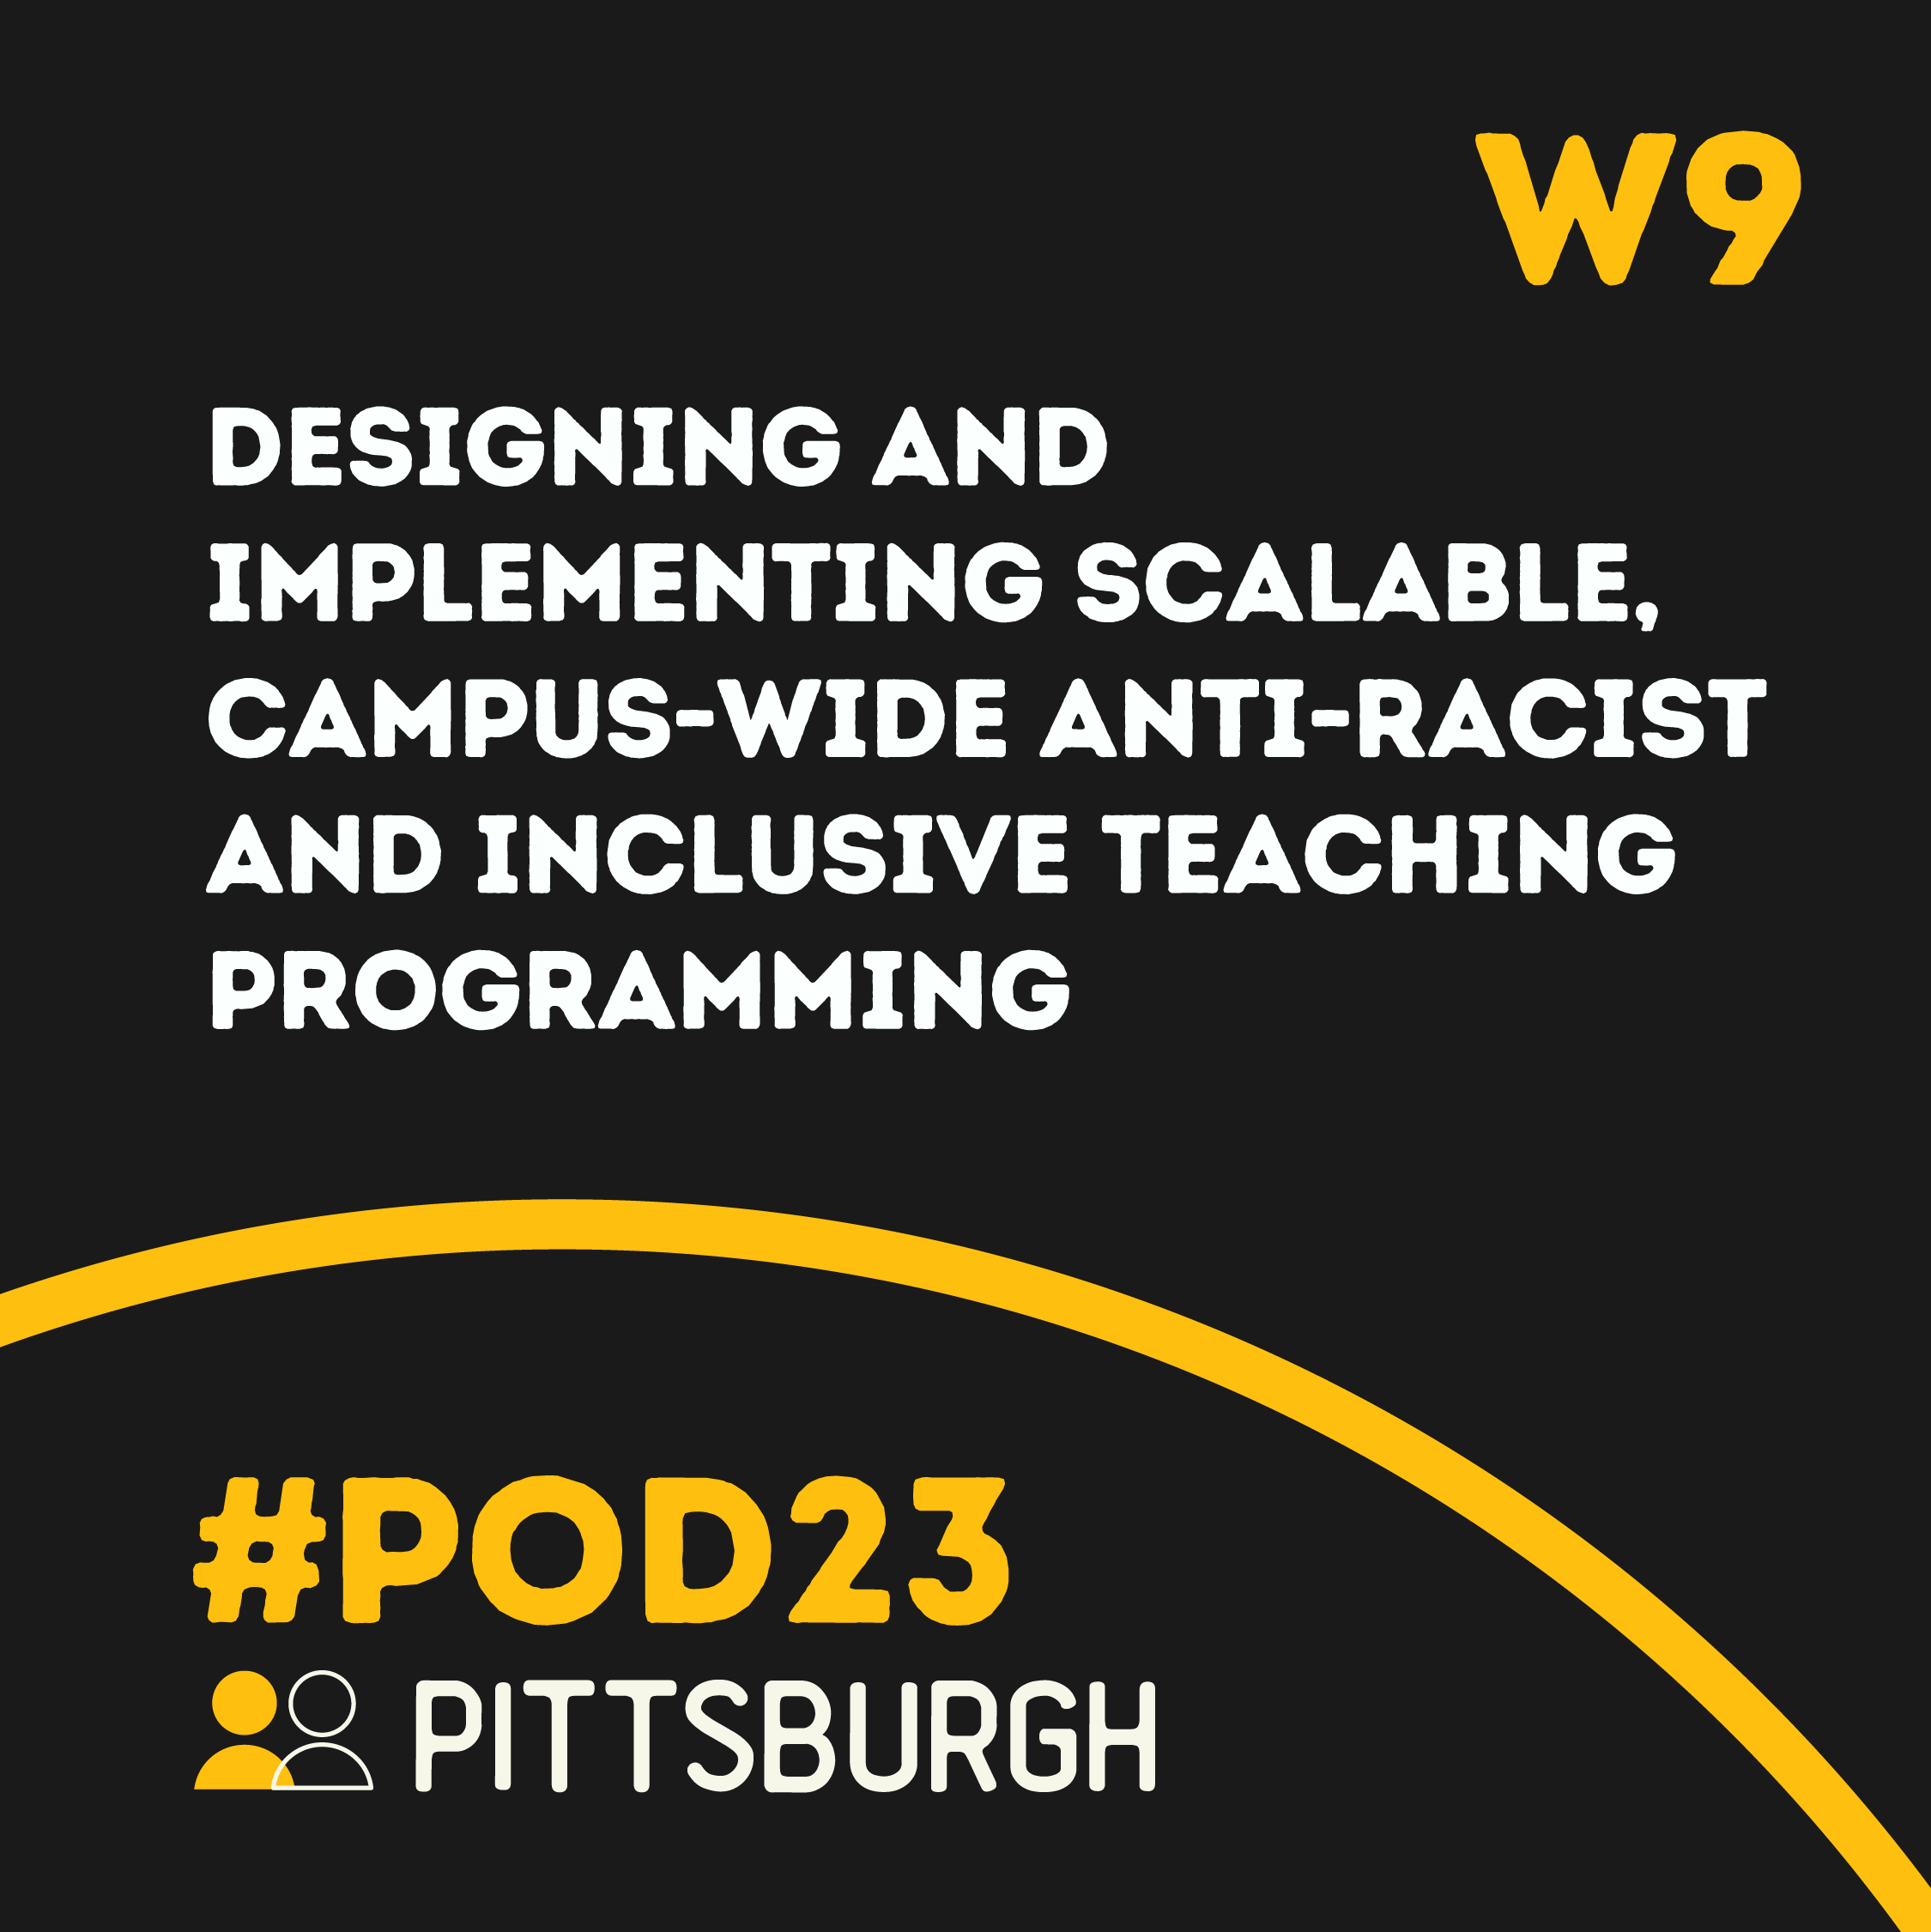 #POD23 W9: Designing and Implementing Scalable, Campus-Wide Anti-Racist and Inclusive Teaching Programming